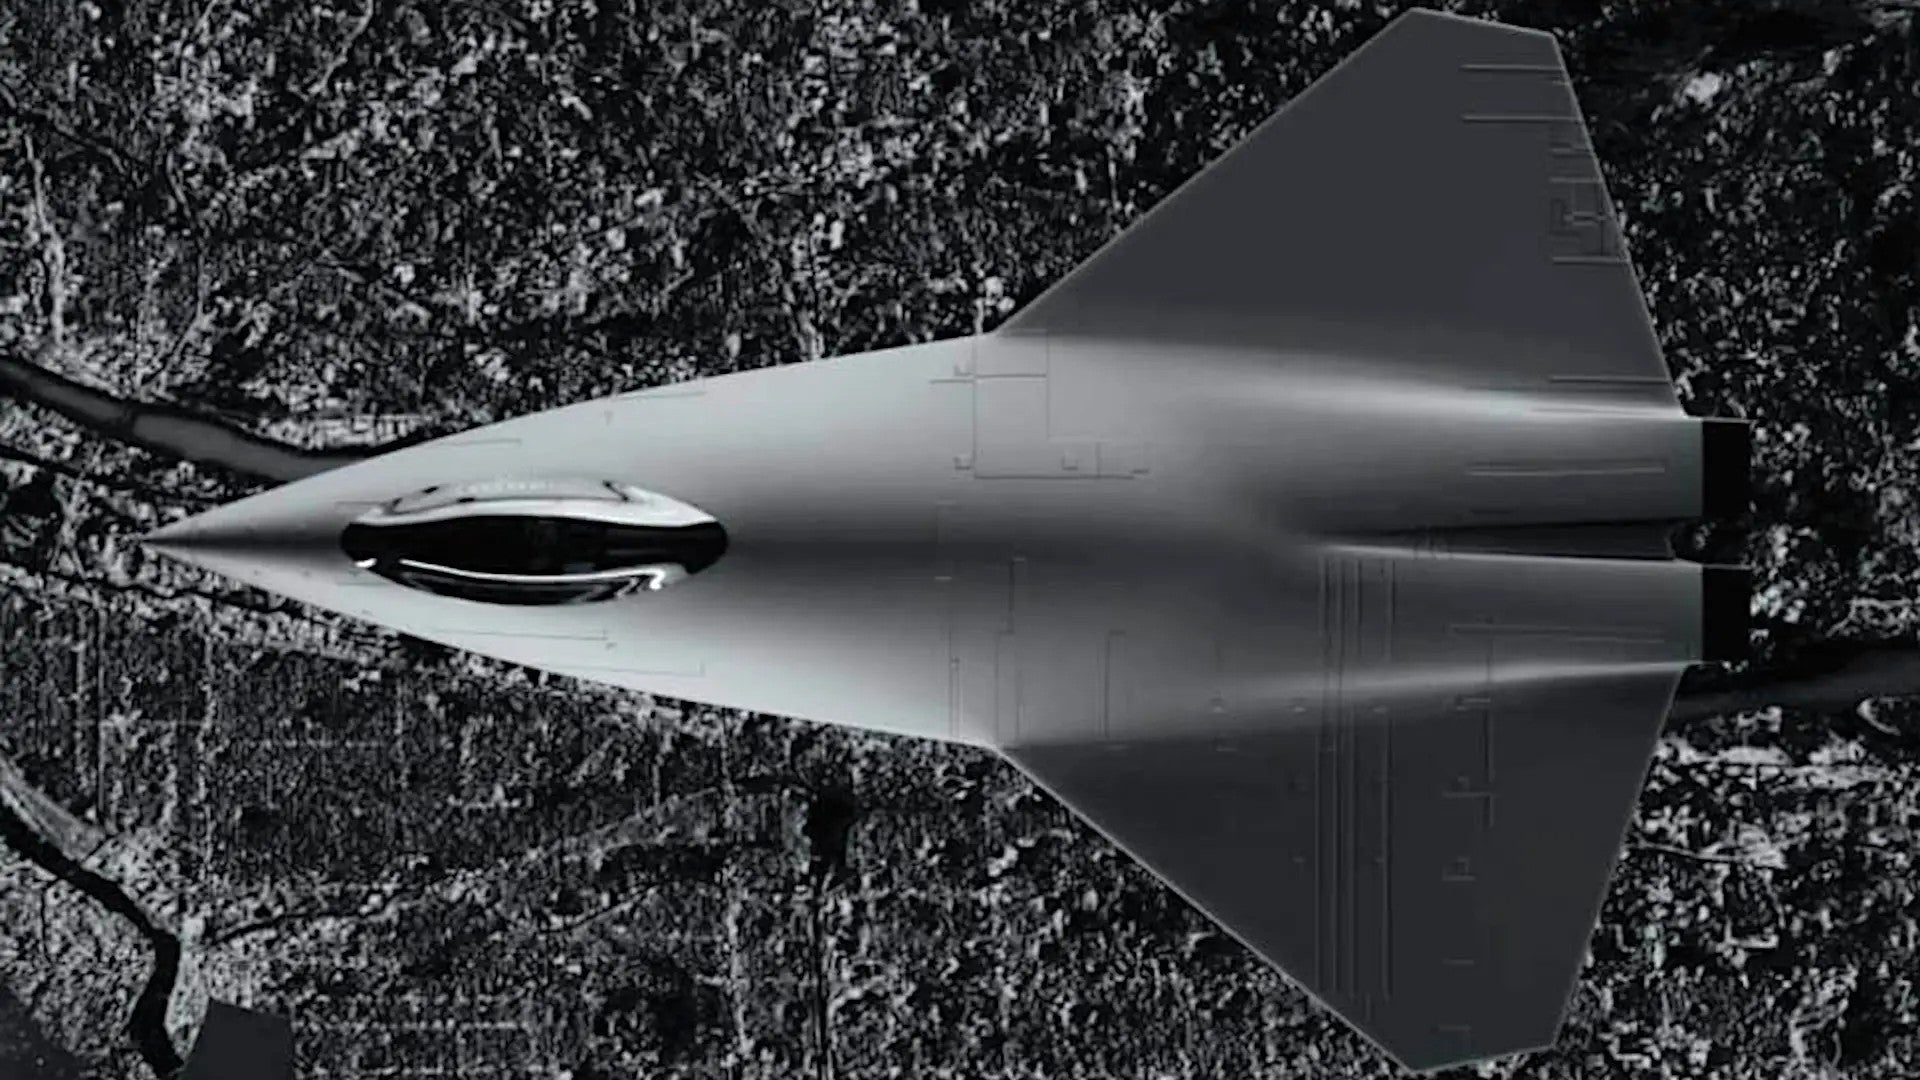 A notional sixth-generation stealth crewed combat jet design. Collins Aerospace